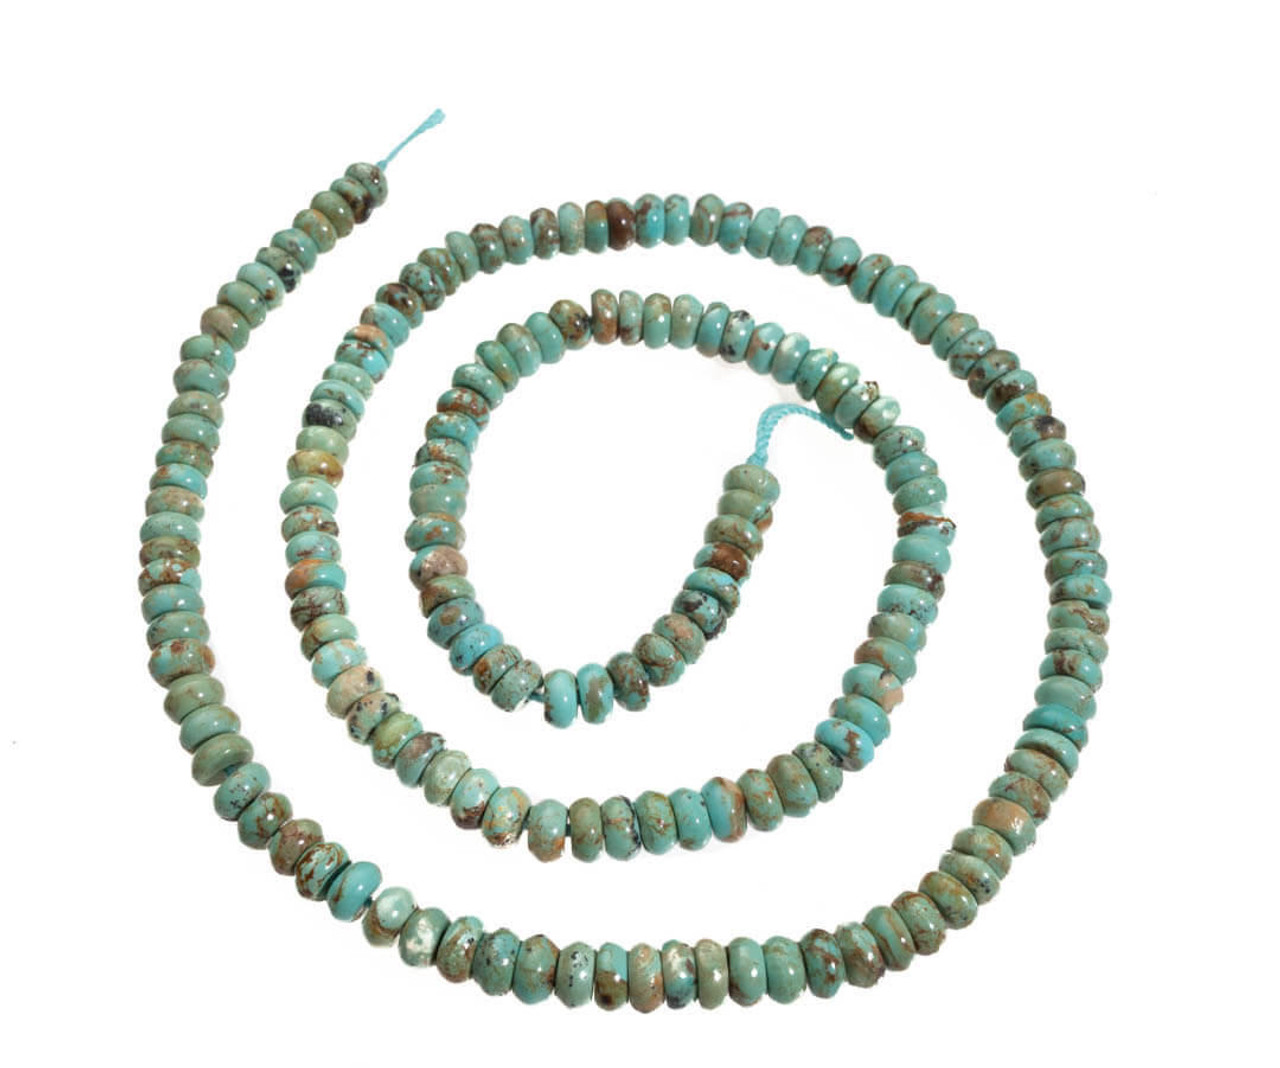 Turquoise Beads Baja Turquoise(Mexico) 4mm Rondell  BT3a1 